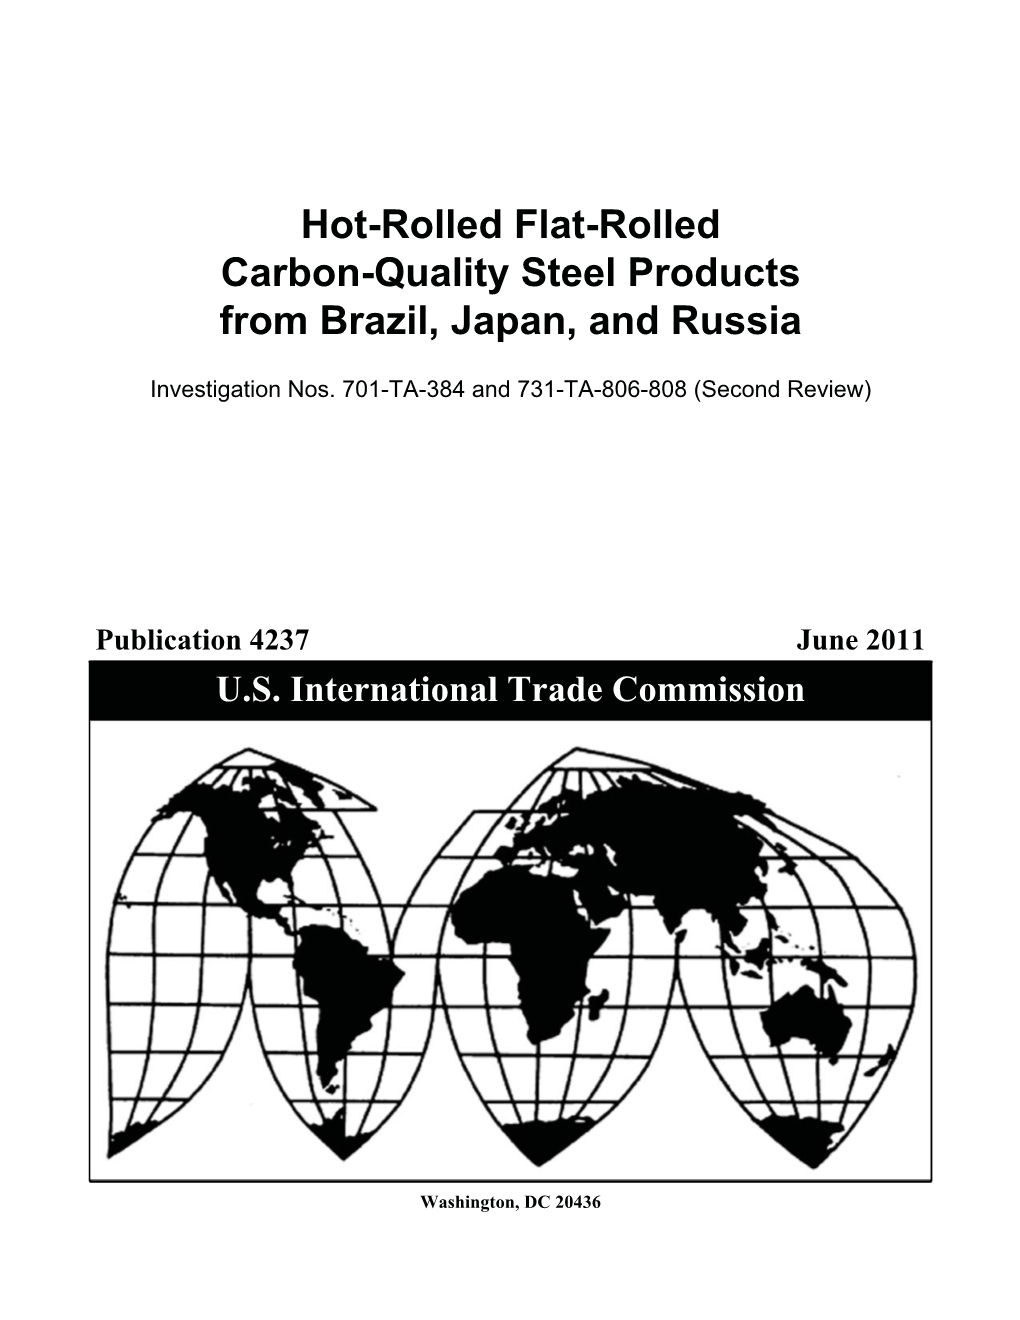 Hot-Rolled Flat-Rolled Carbon-Quality Steel Products from Brazil, Japan, and Russia